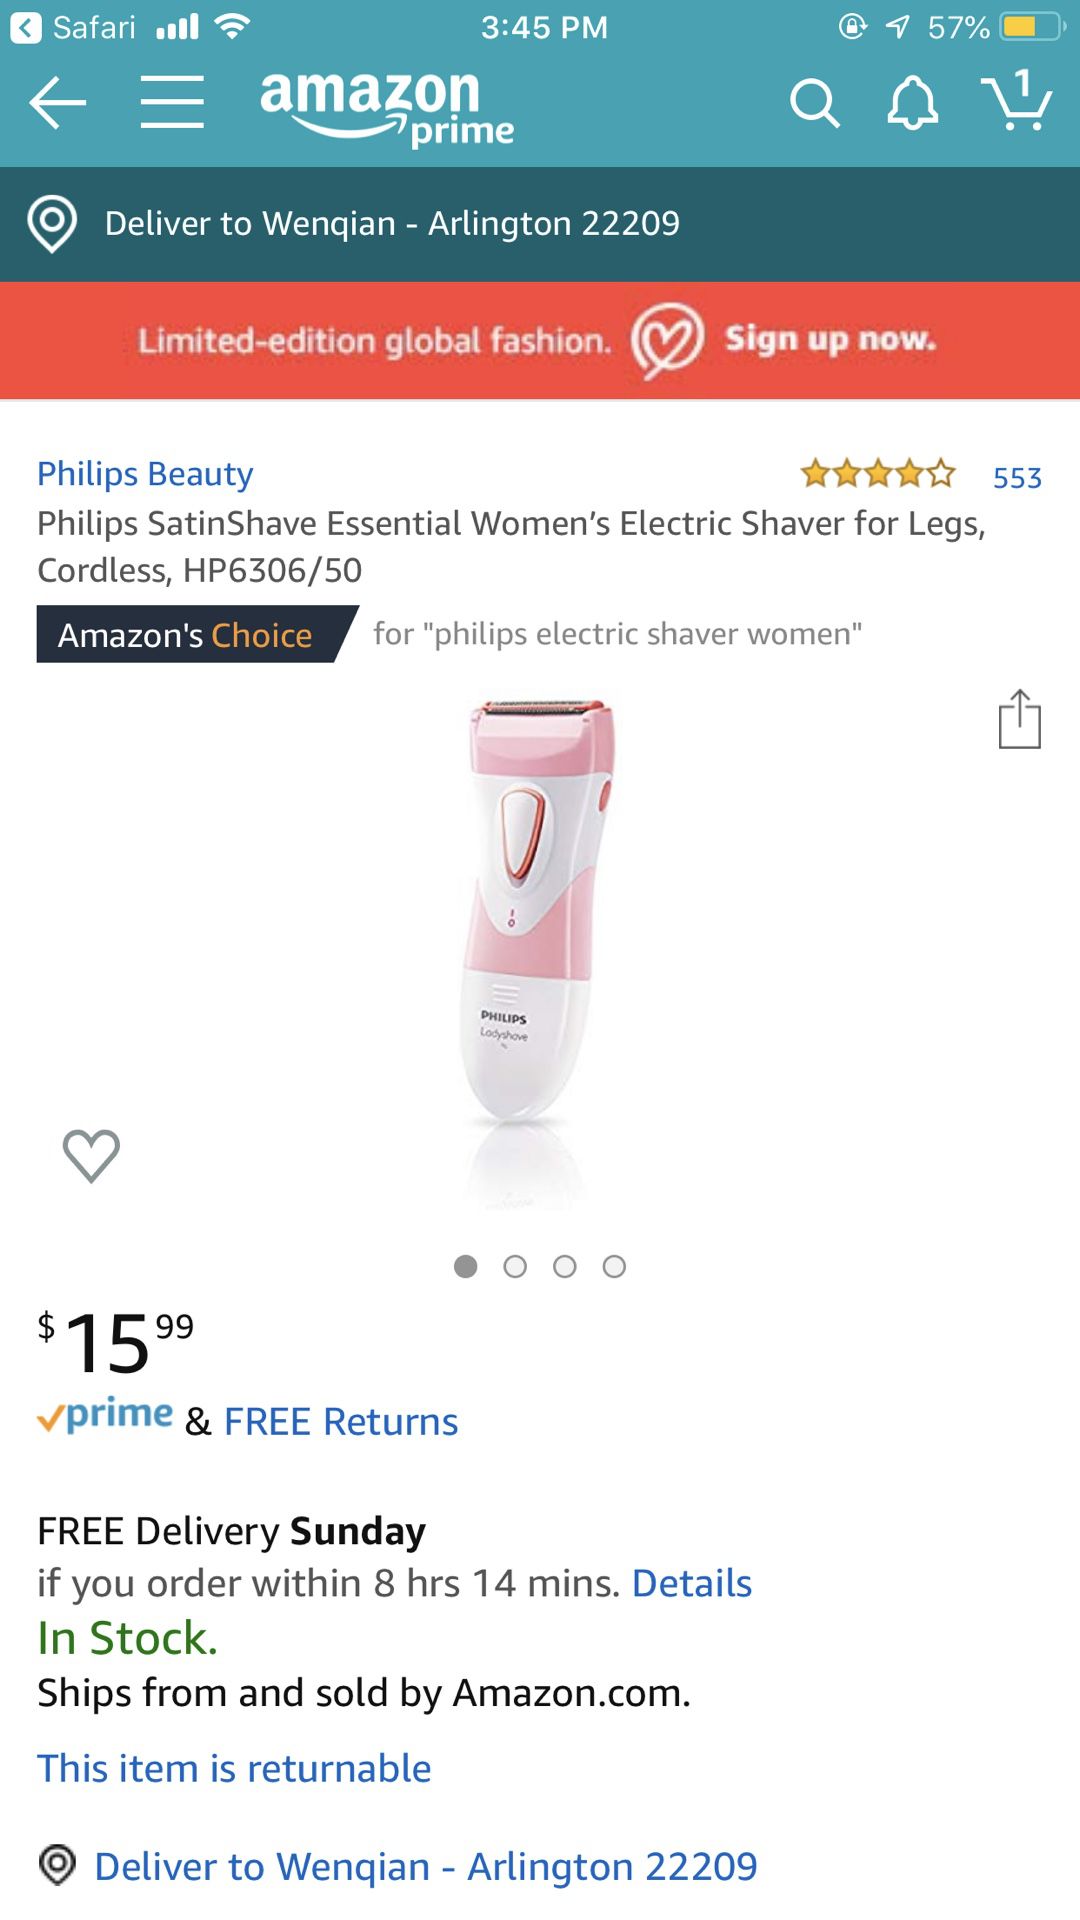 Philips women’s electronic shaver for legs